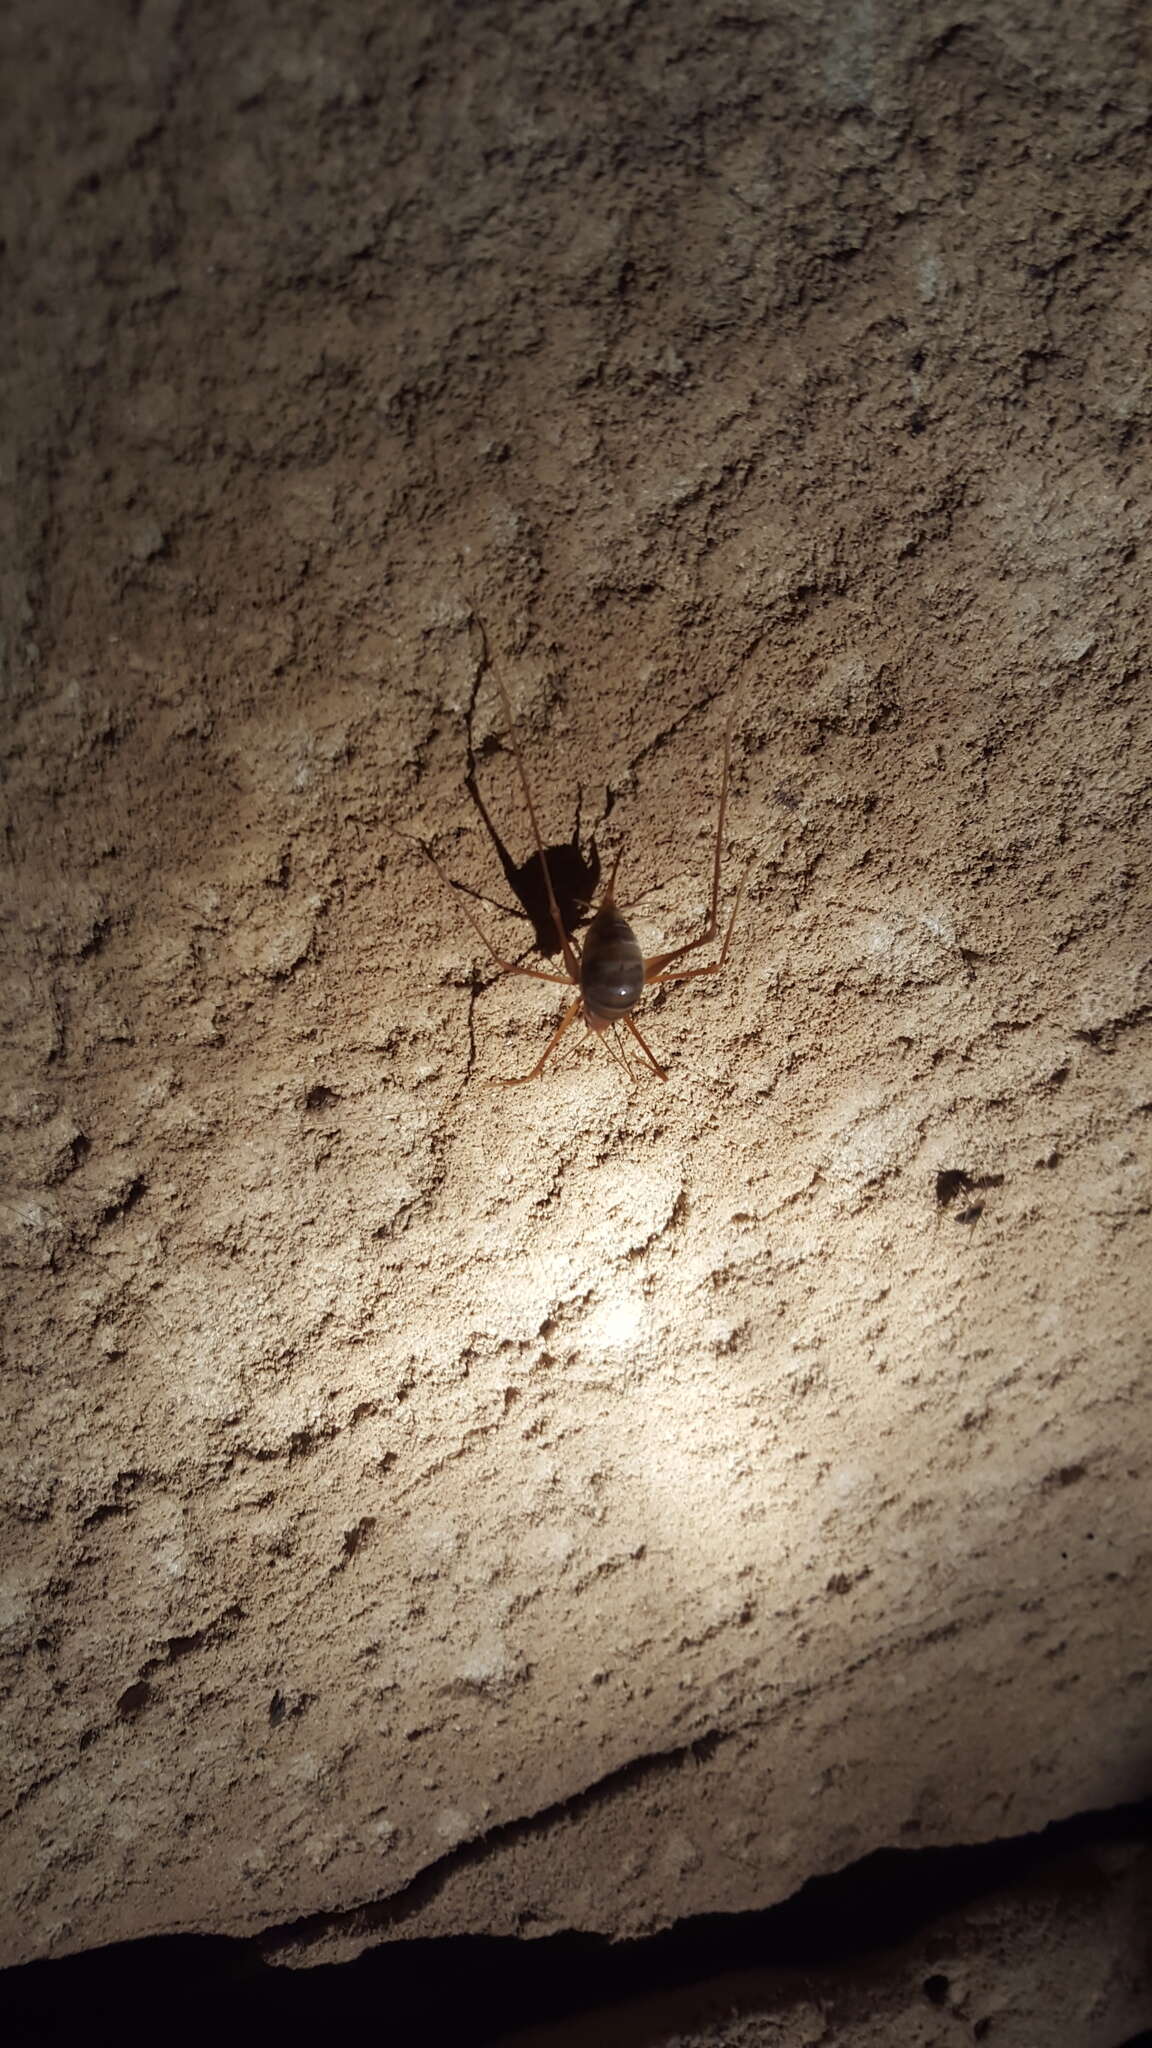 Image of Common Cave Cricket